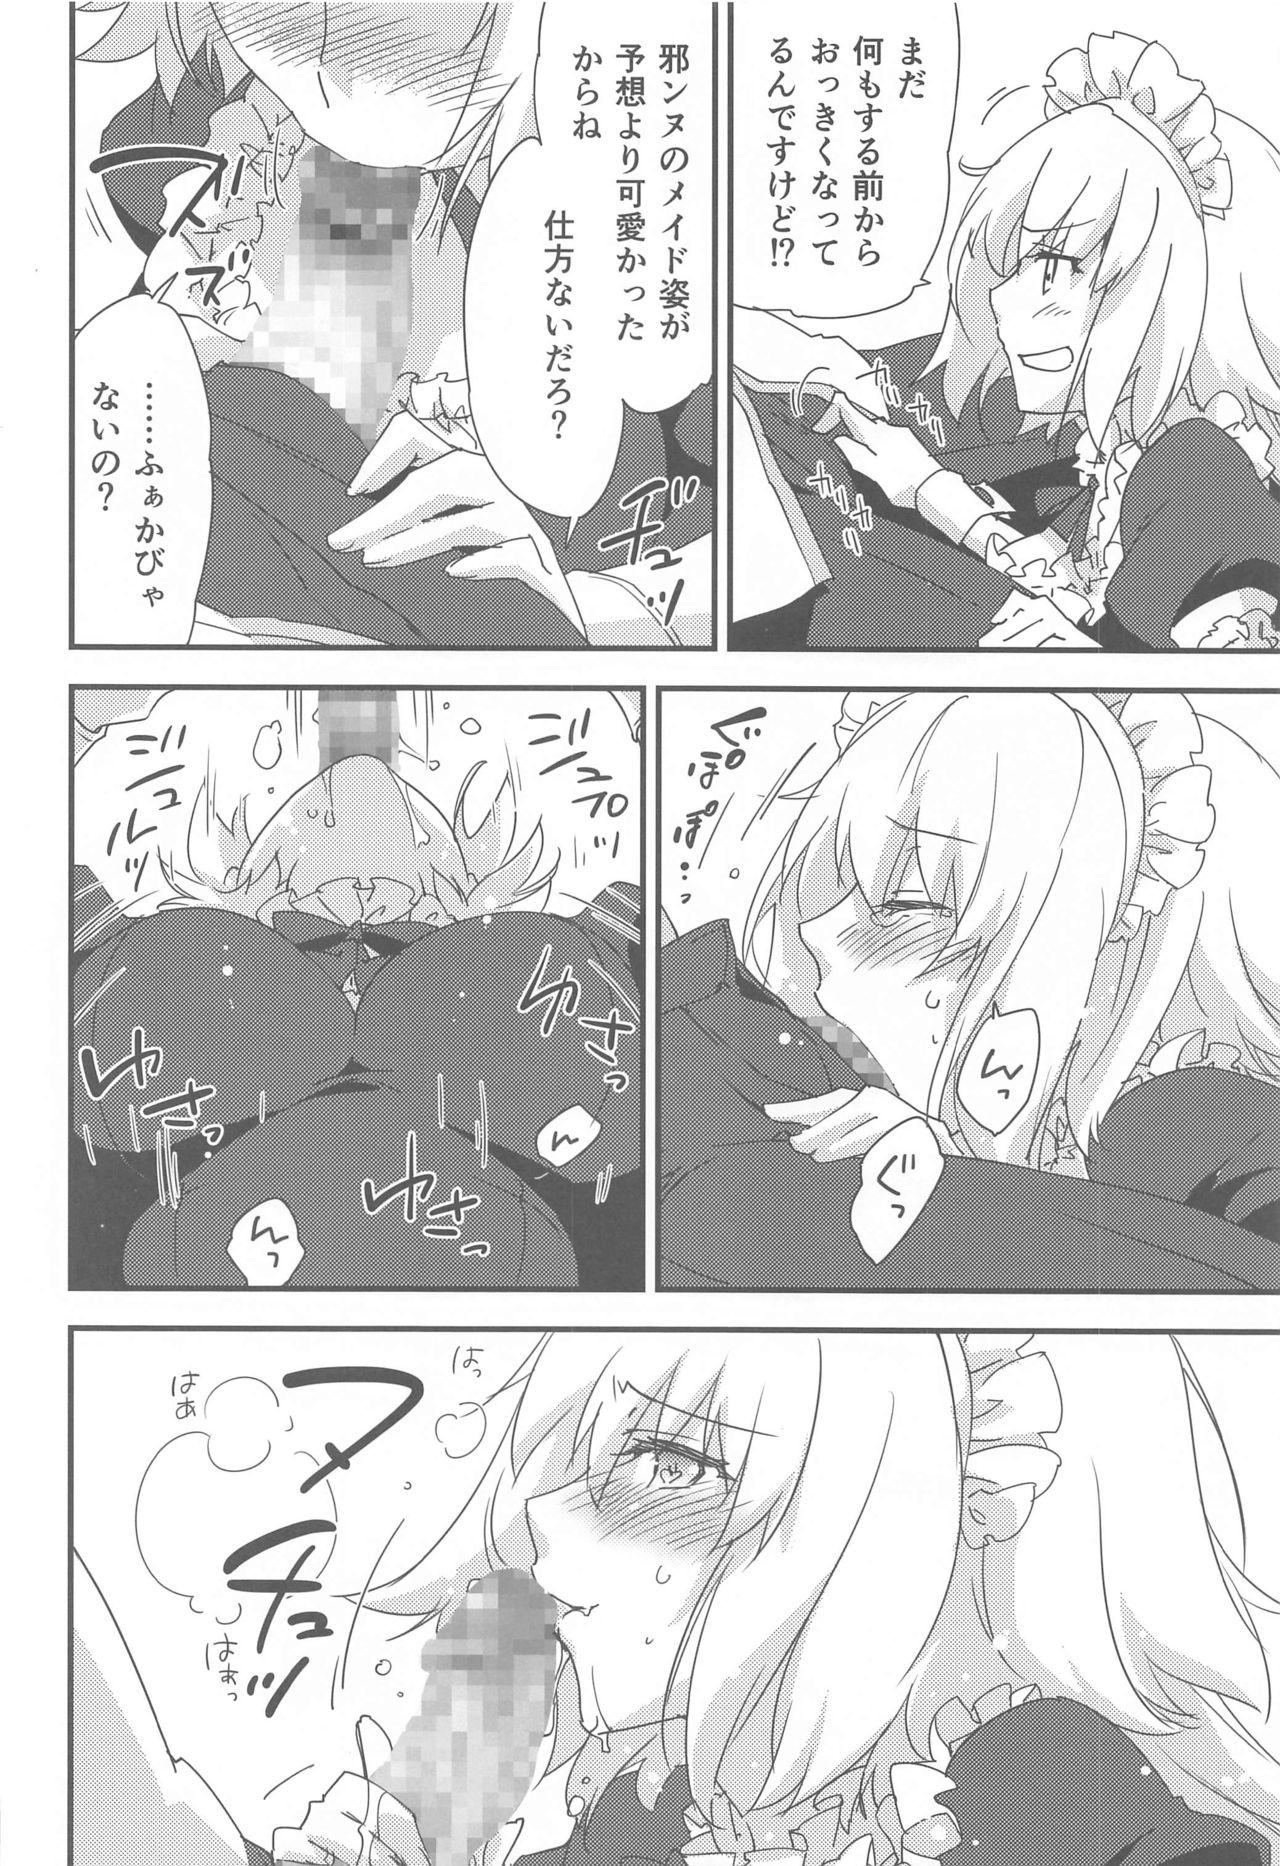 Squirters Gohoushi Maid Jeanne-chan - Fate grand order Cosplay - Page 9